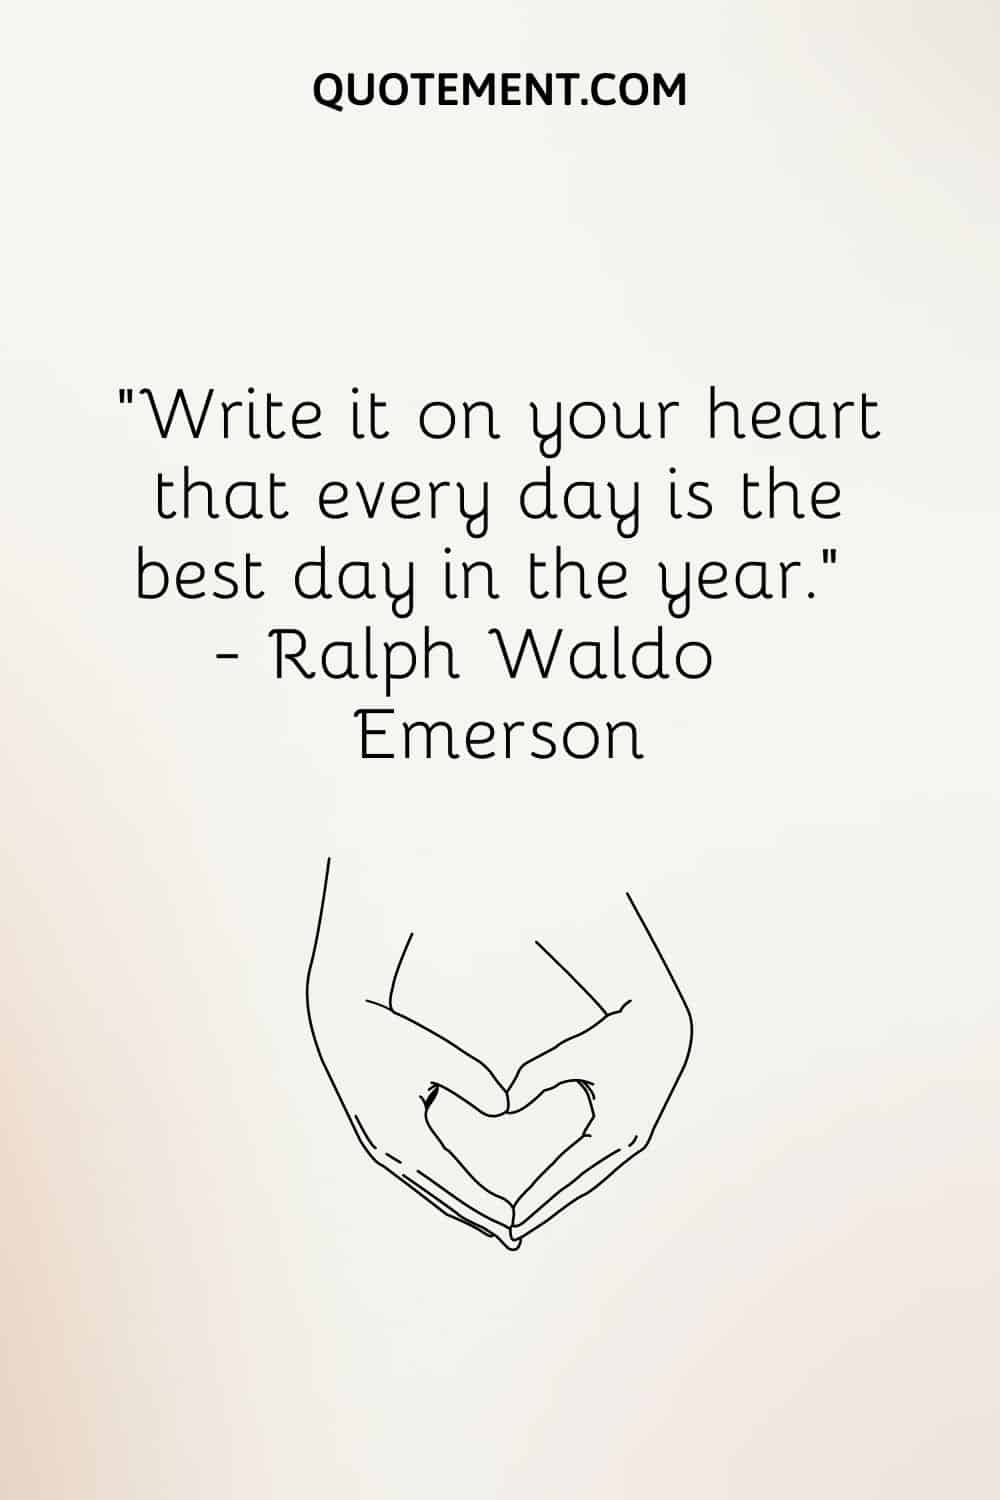 Write it on your heart that every day is the best day in the year